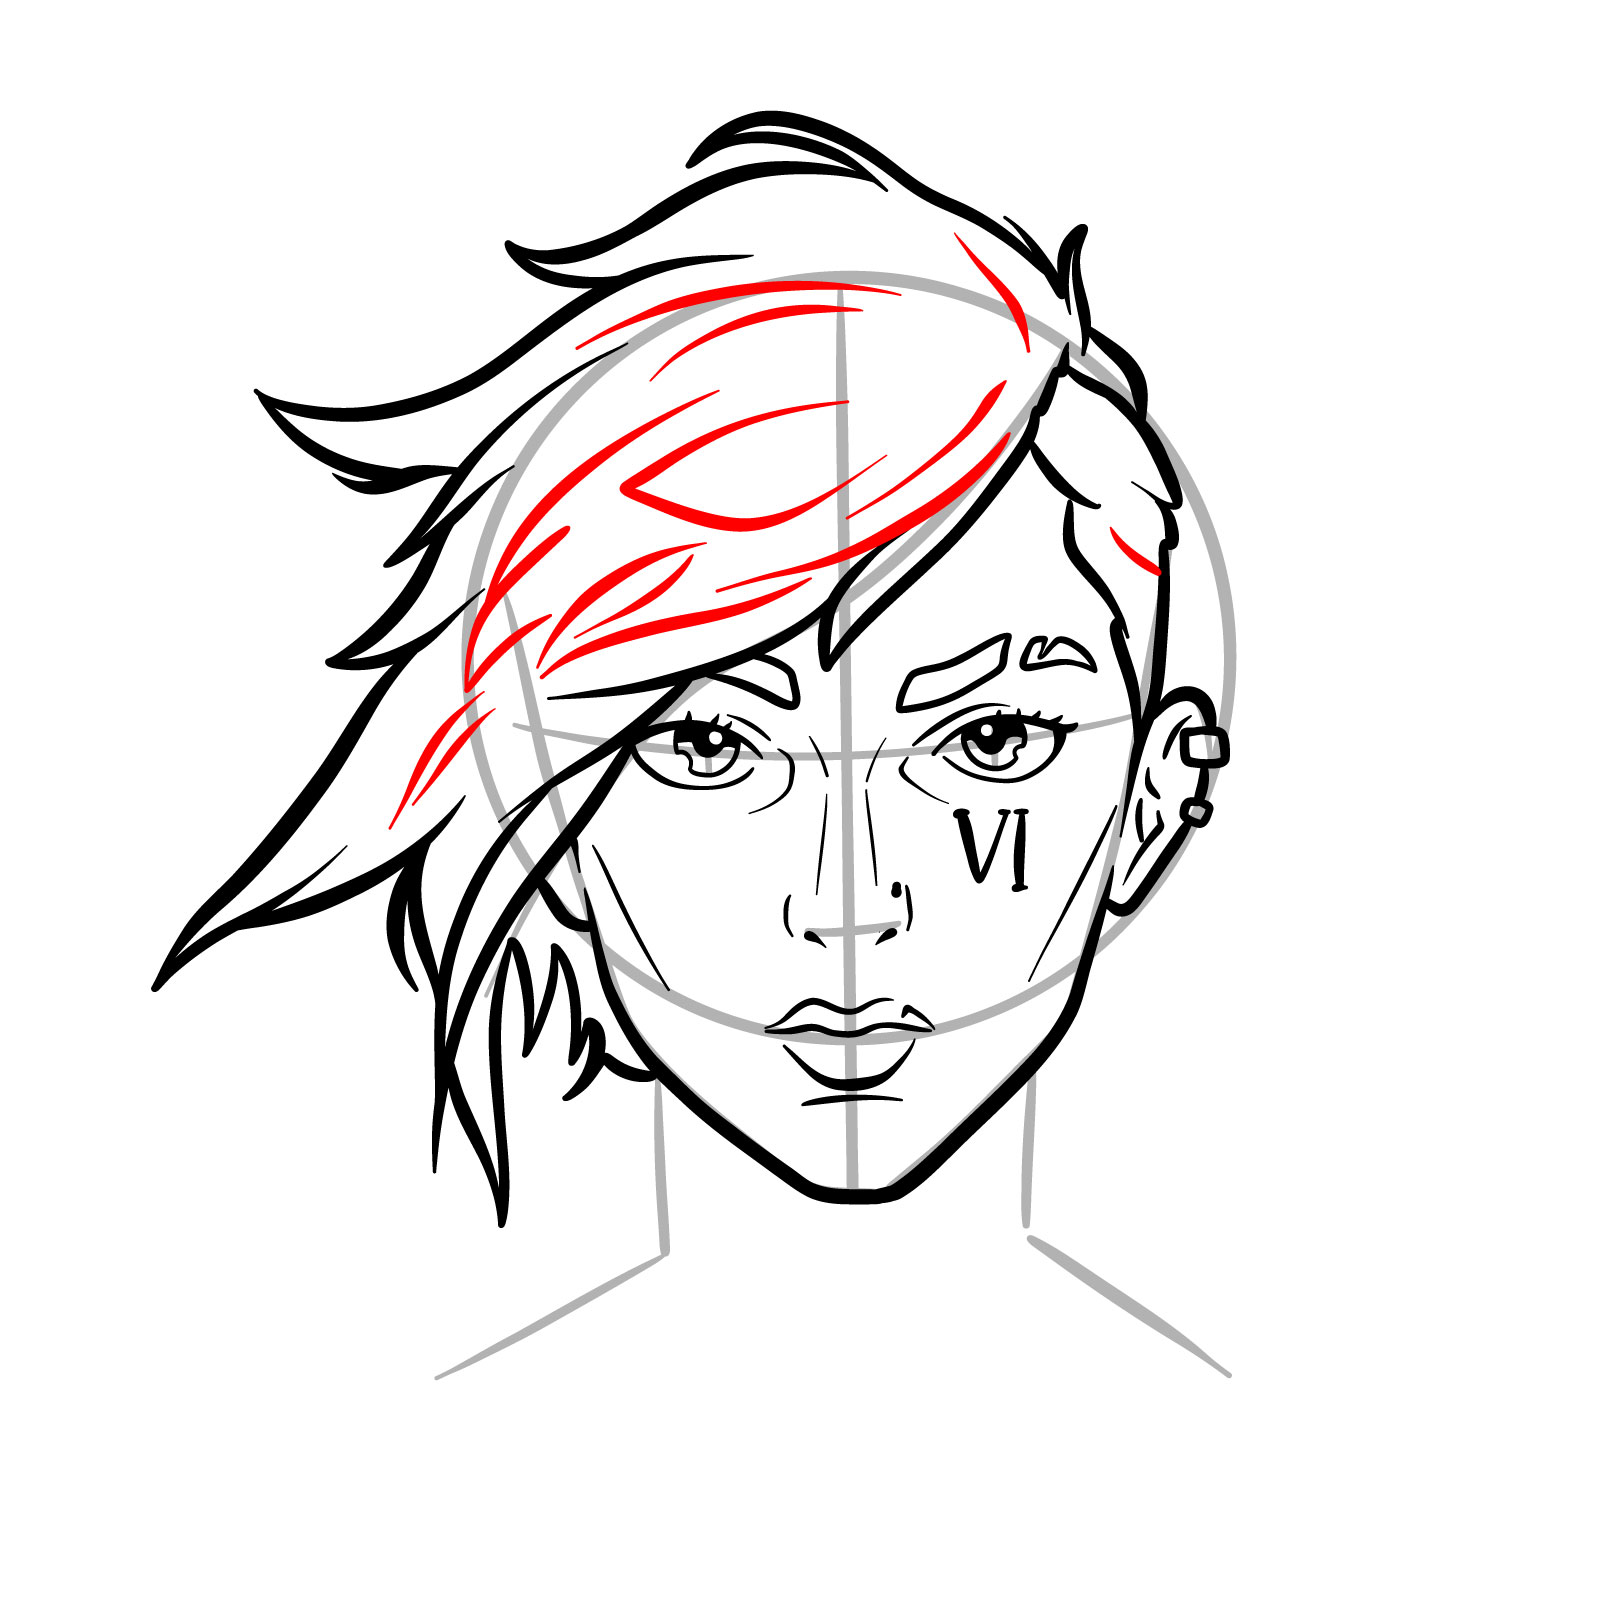 How to draw the face of Vi from Arcane - step 12